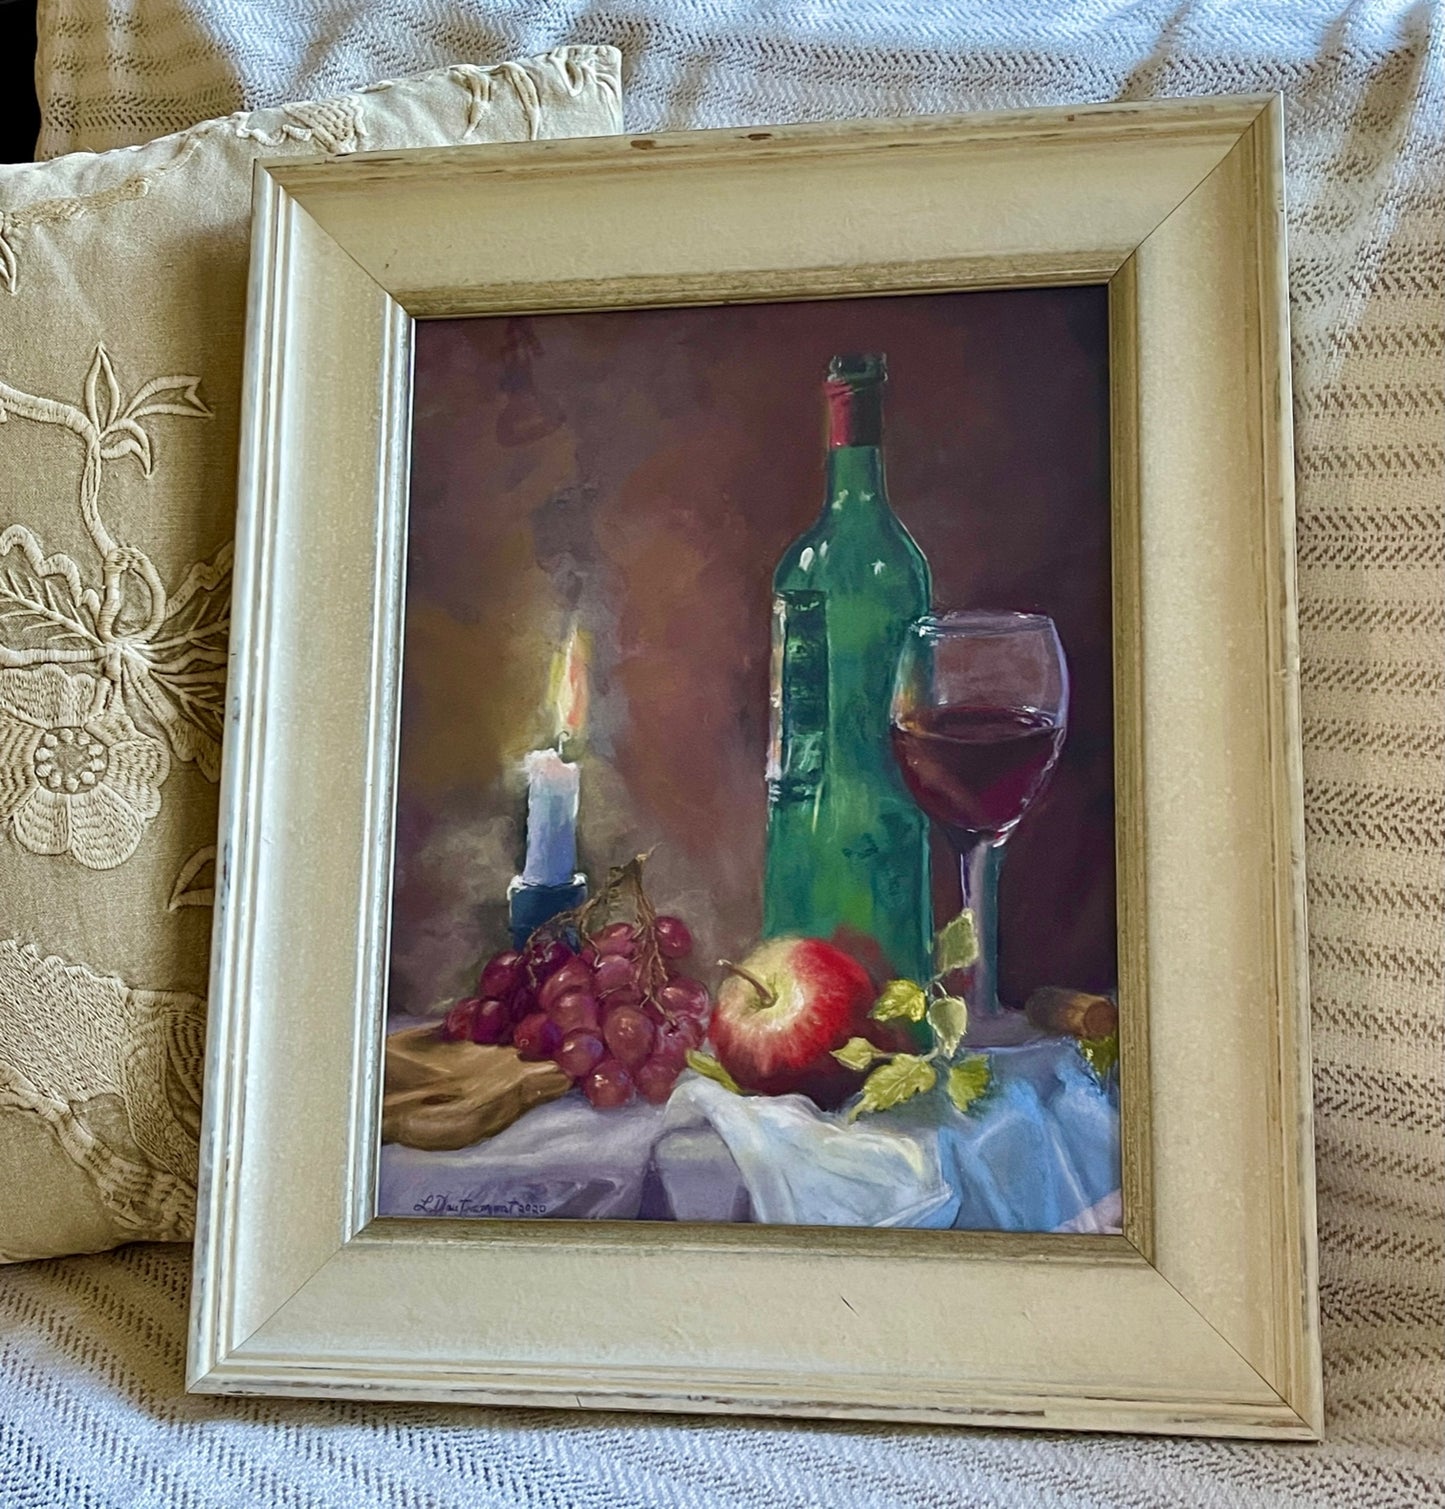 Lisa Dautremont - Grapes by Candlelight